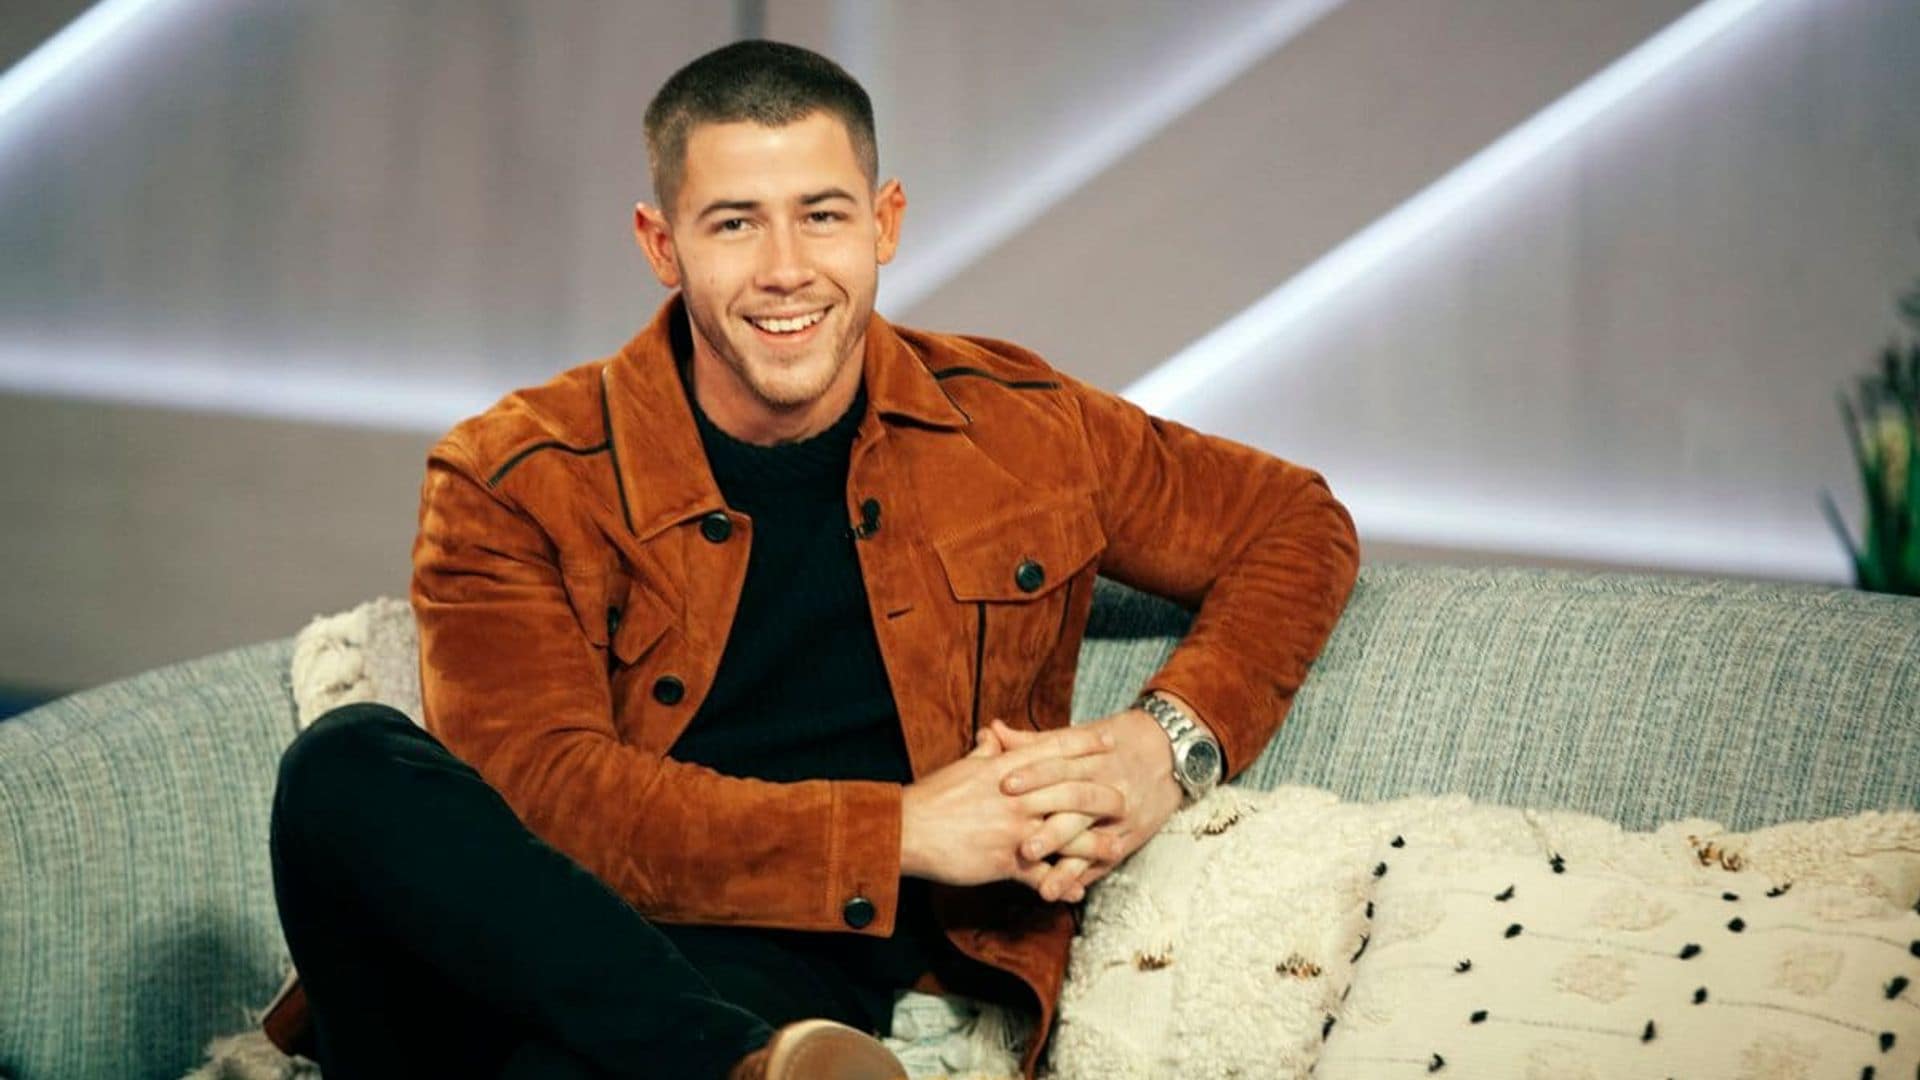 Nick Jonas said his dream movie role is to play Bruce Springsteen